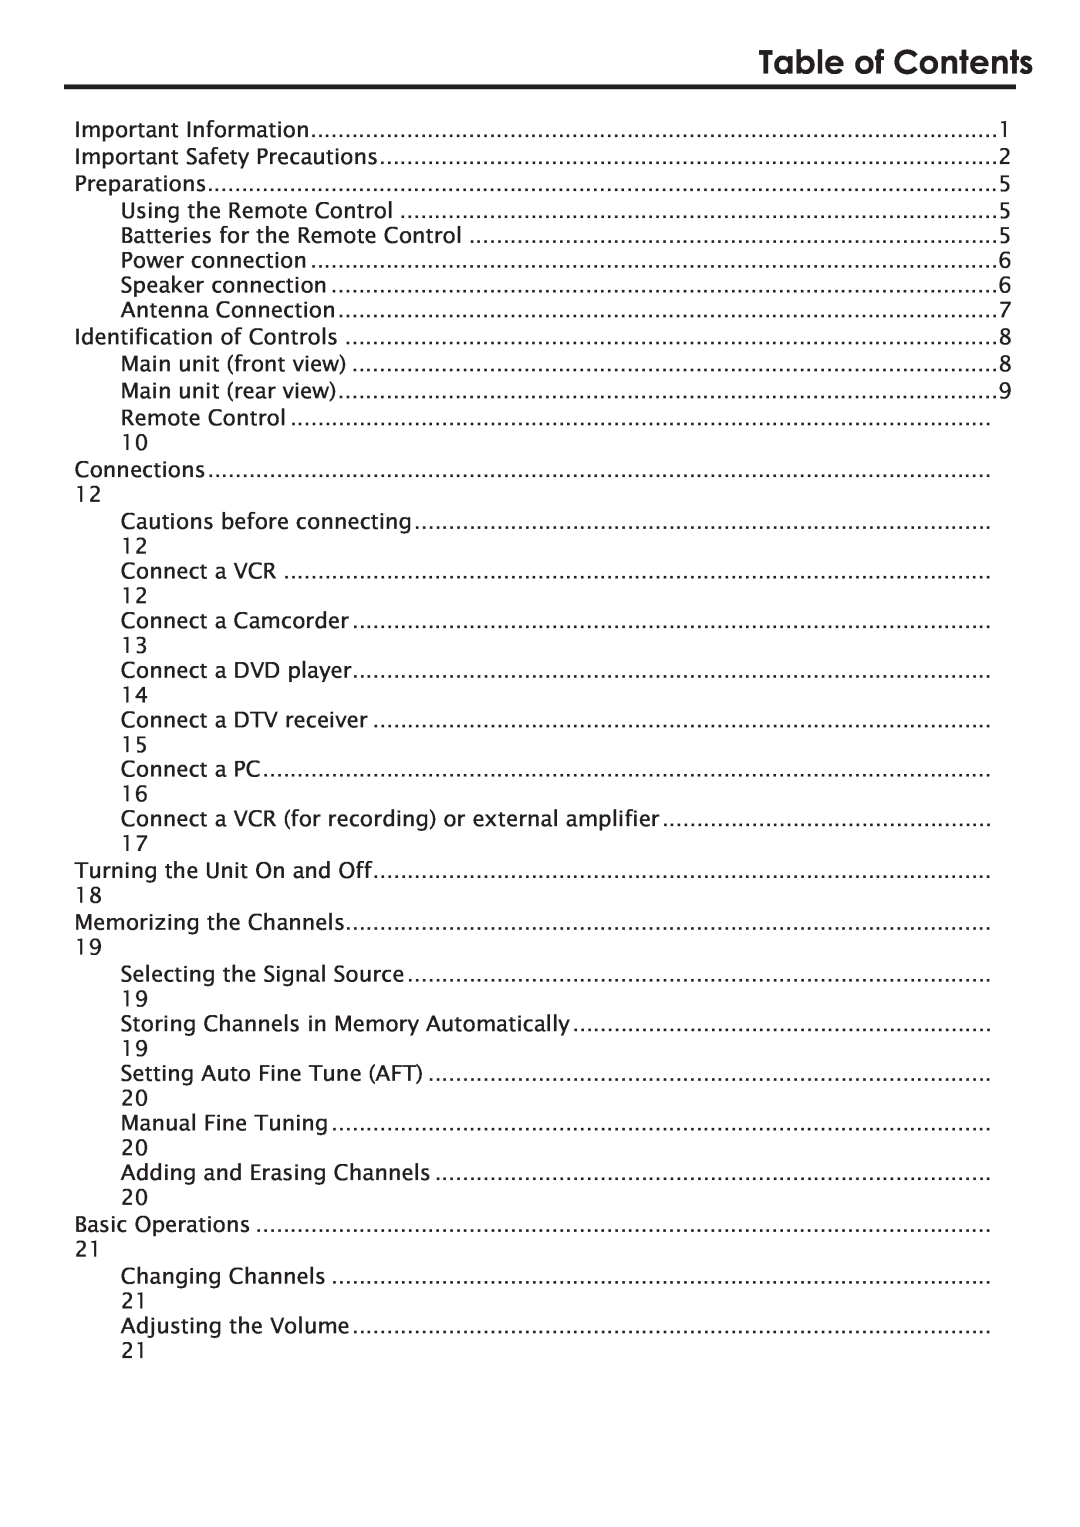 Primate Systems PDP TV manual Table of Contents 